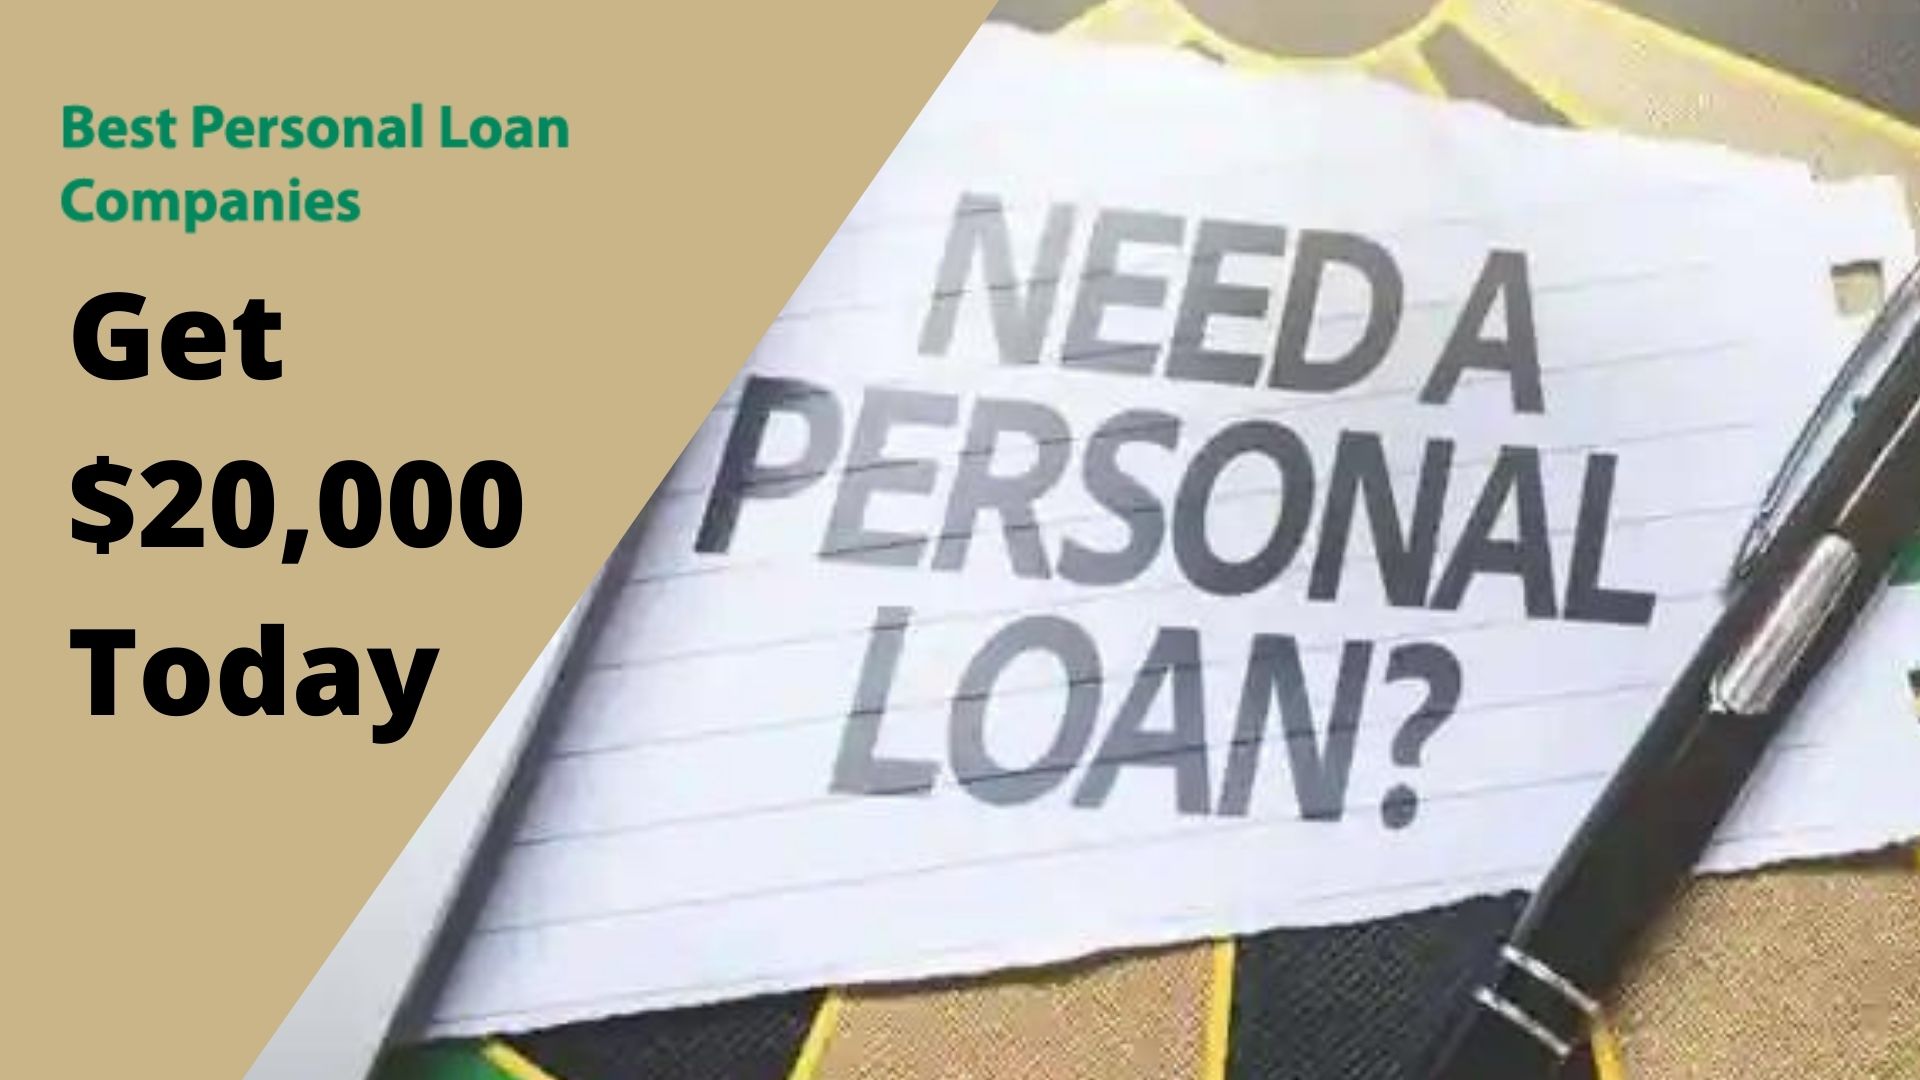 How To Get A $ 20,000 Loan?